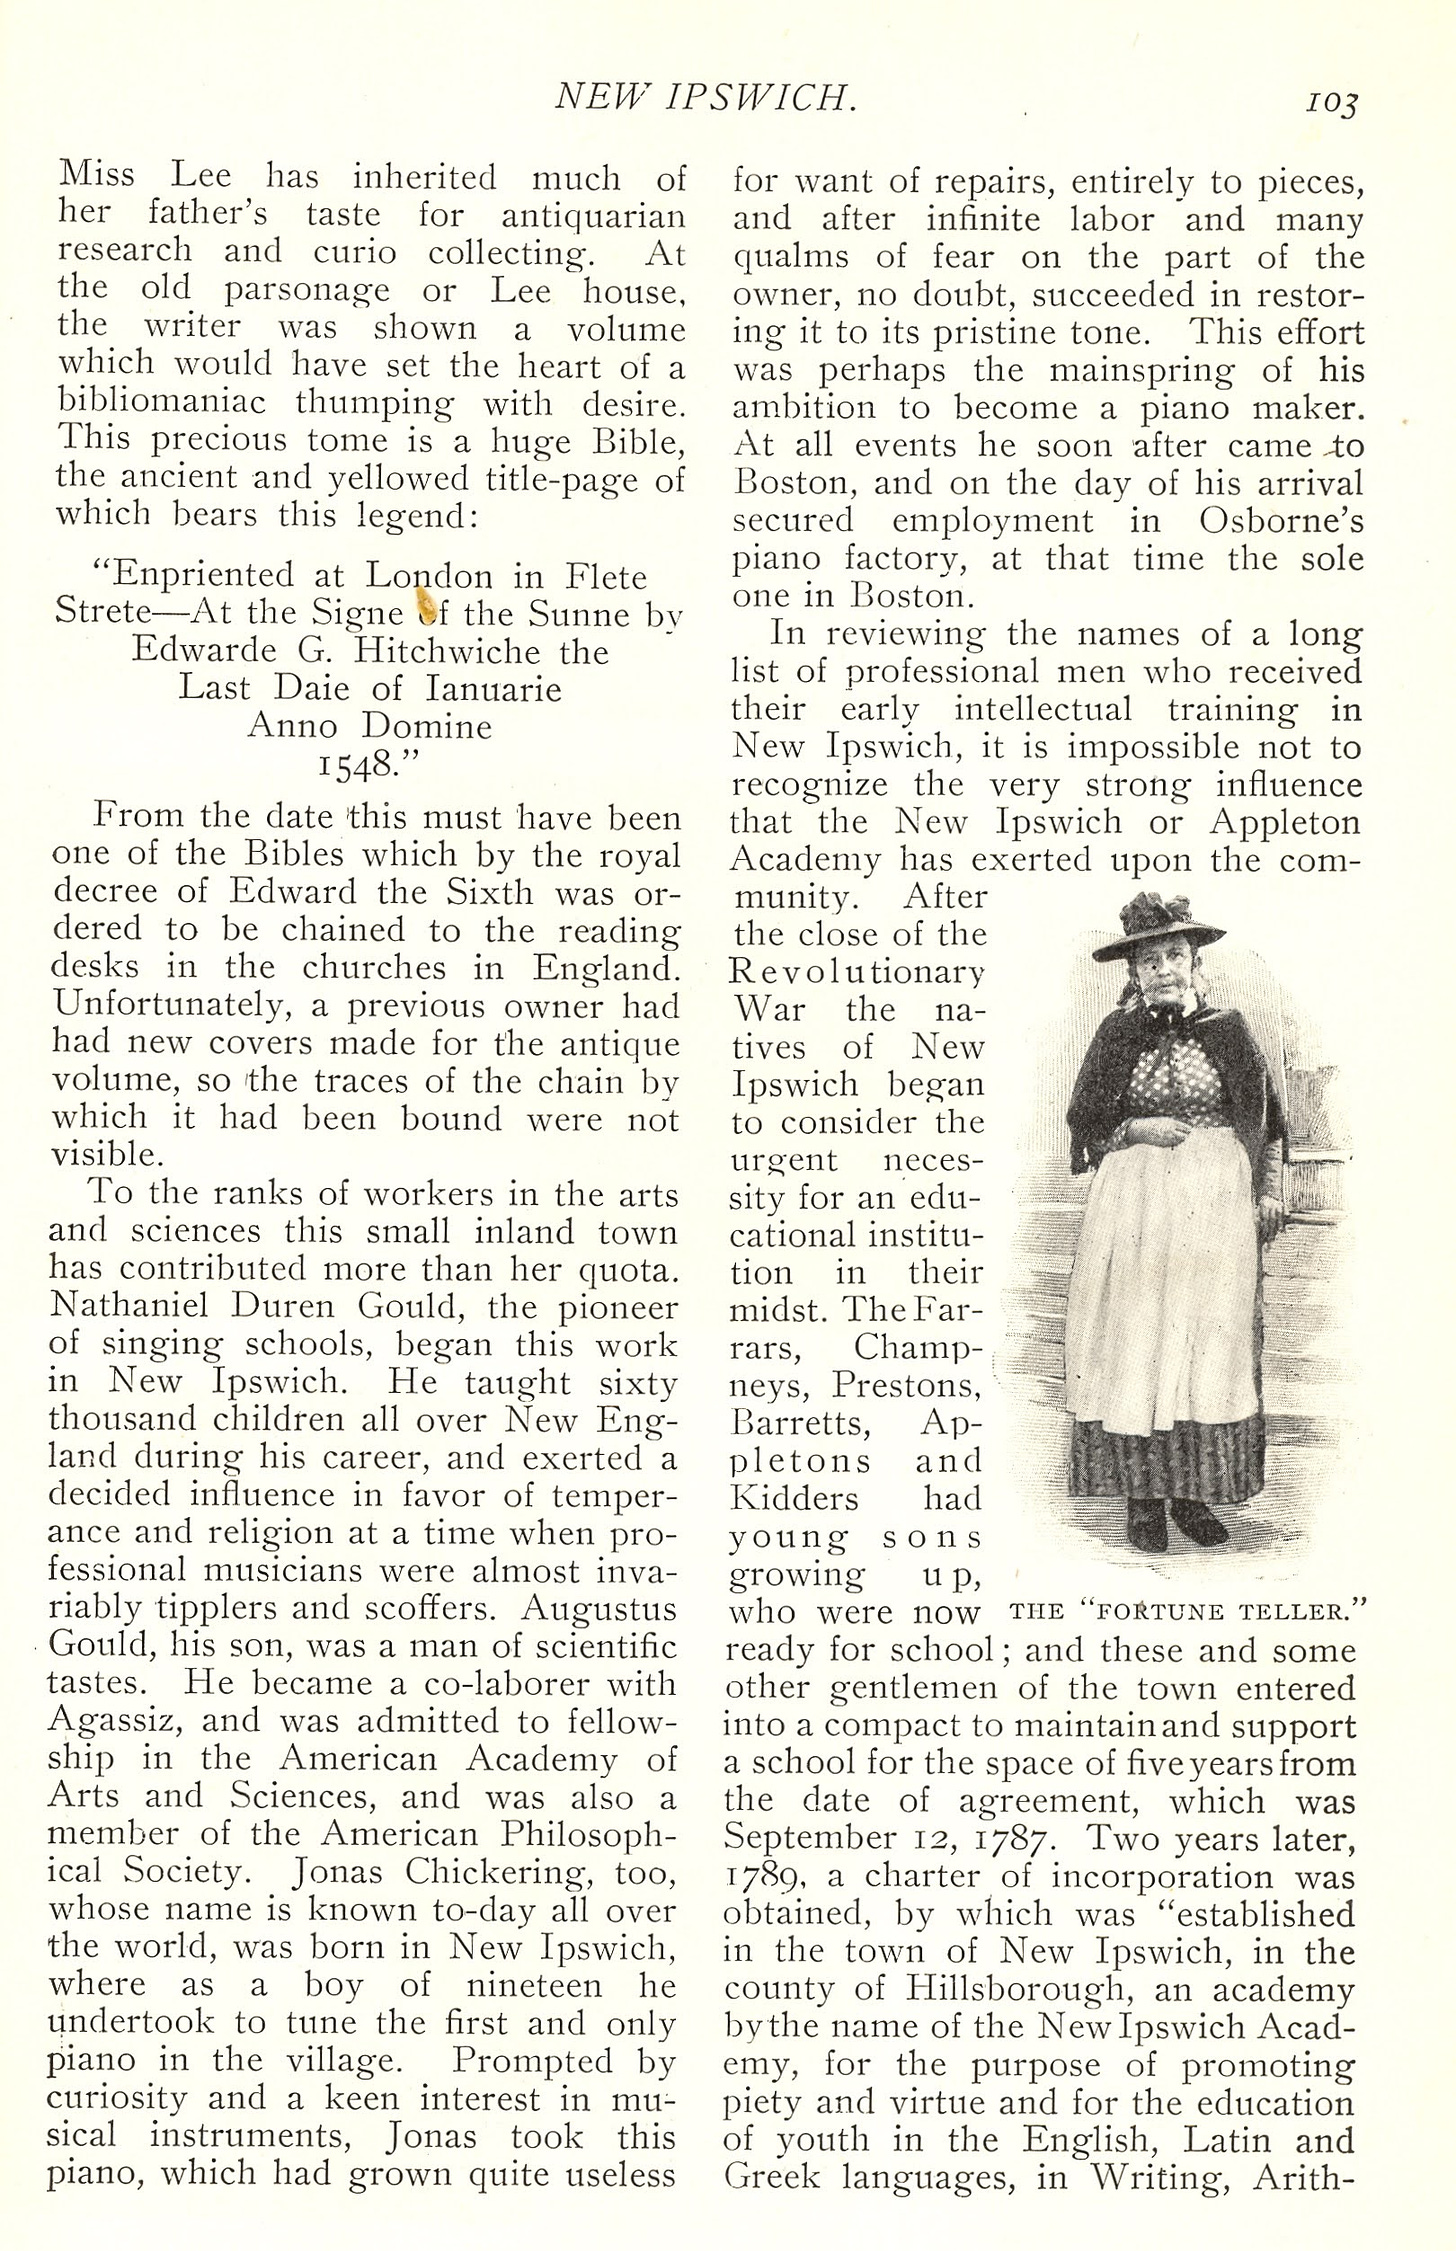 New England Magazine, March 1900, page 103